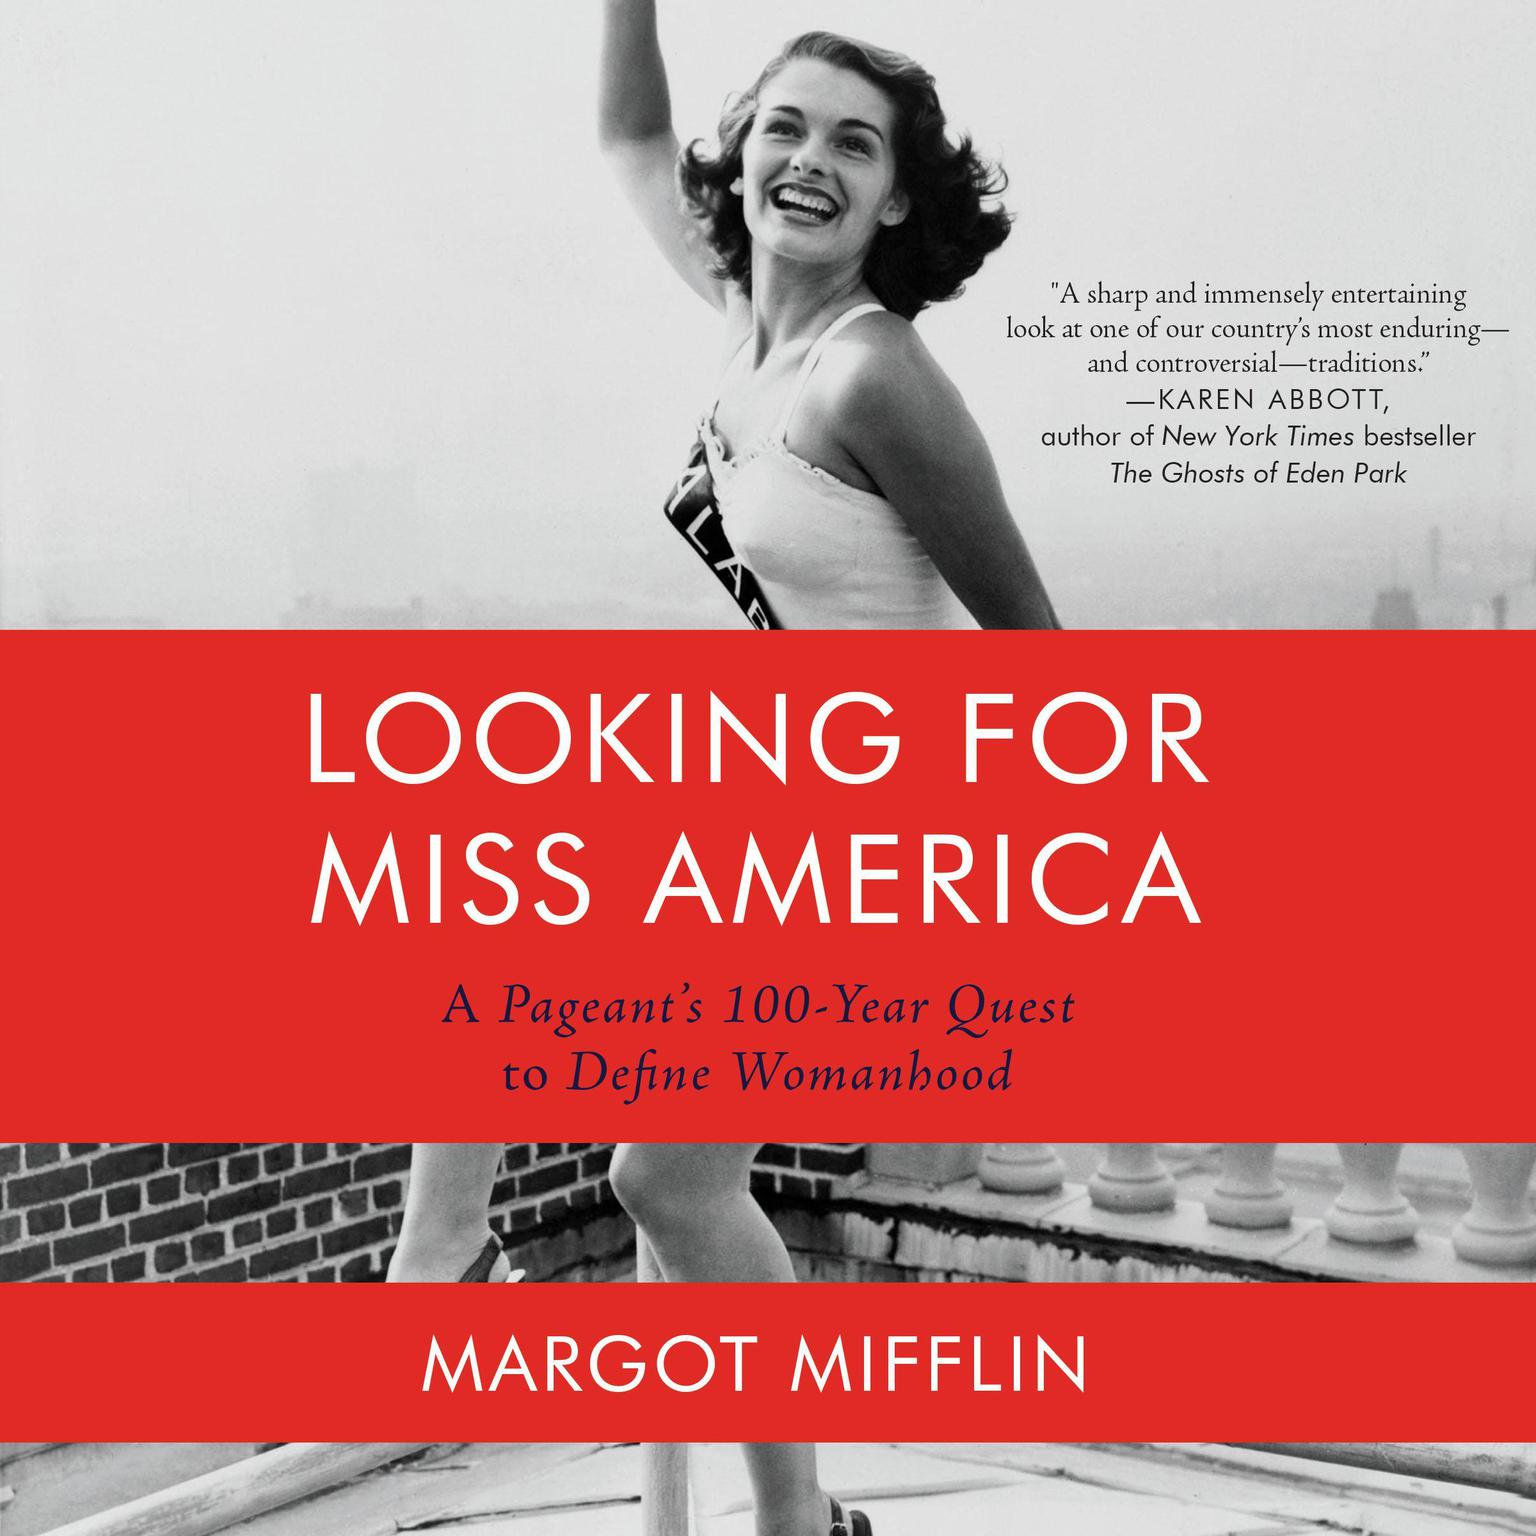 Looking for Miss America: A Pageant’s 100-Year Quest to Define Womanhood Audiobook, by Margot Mifflin